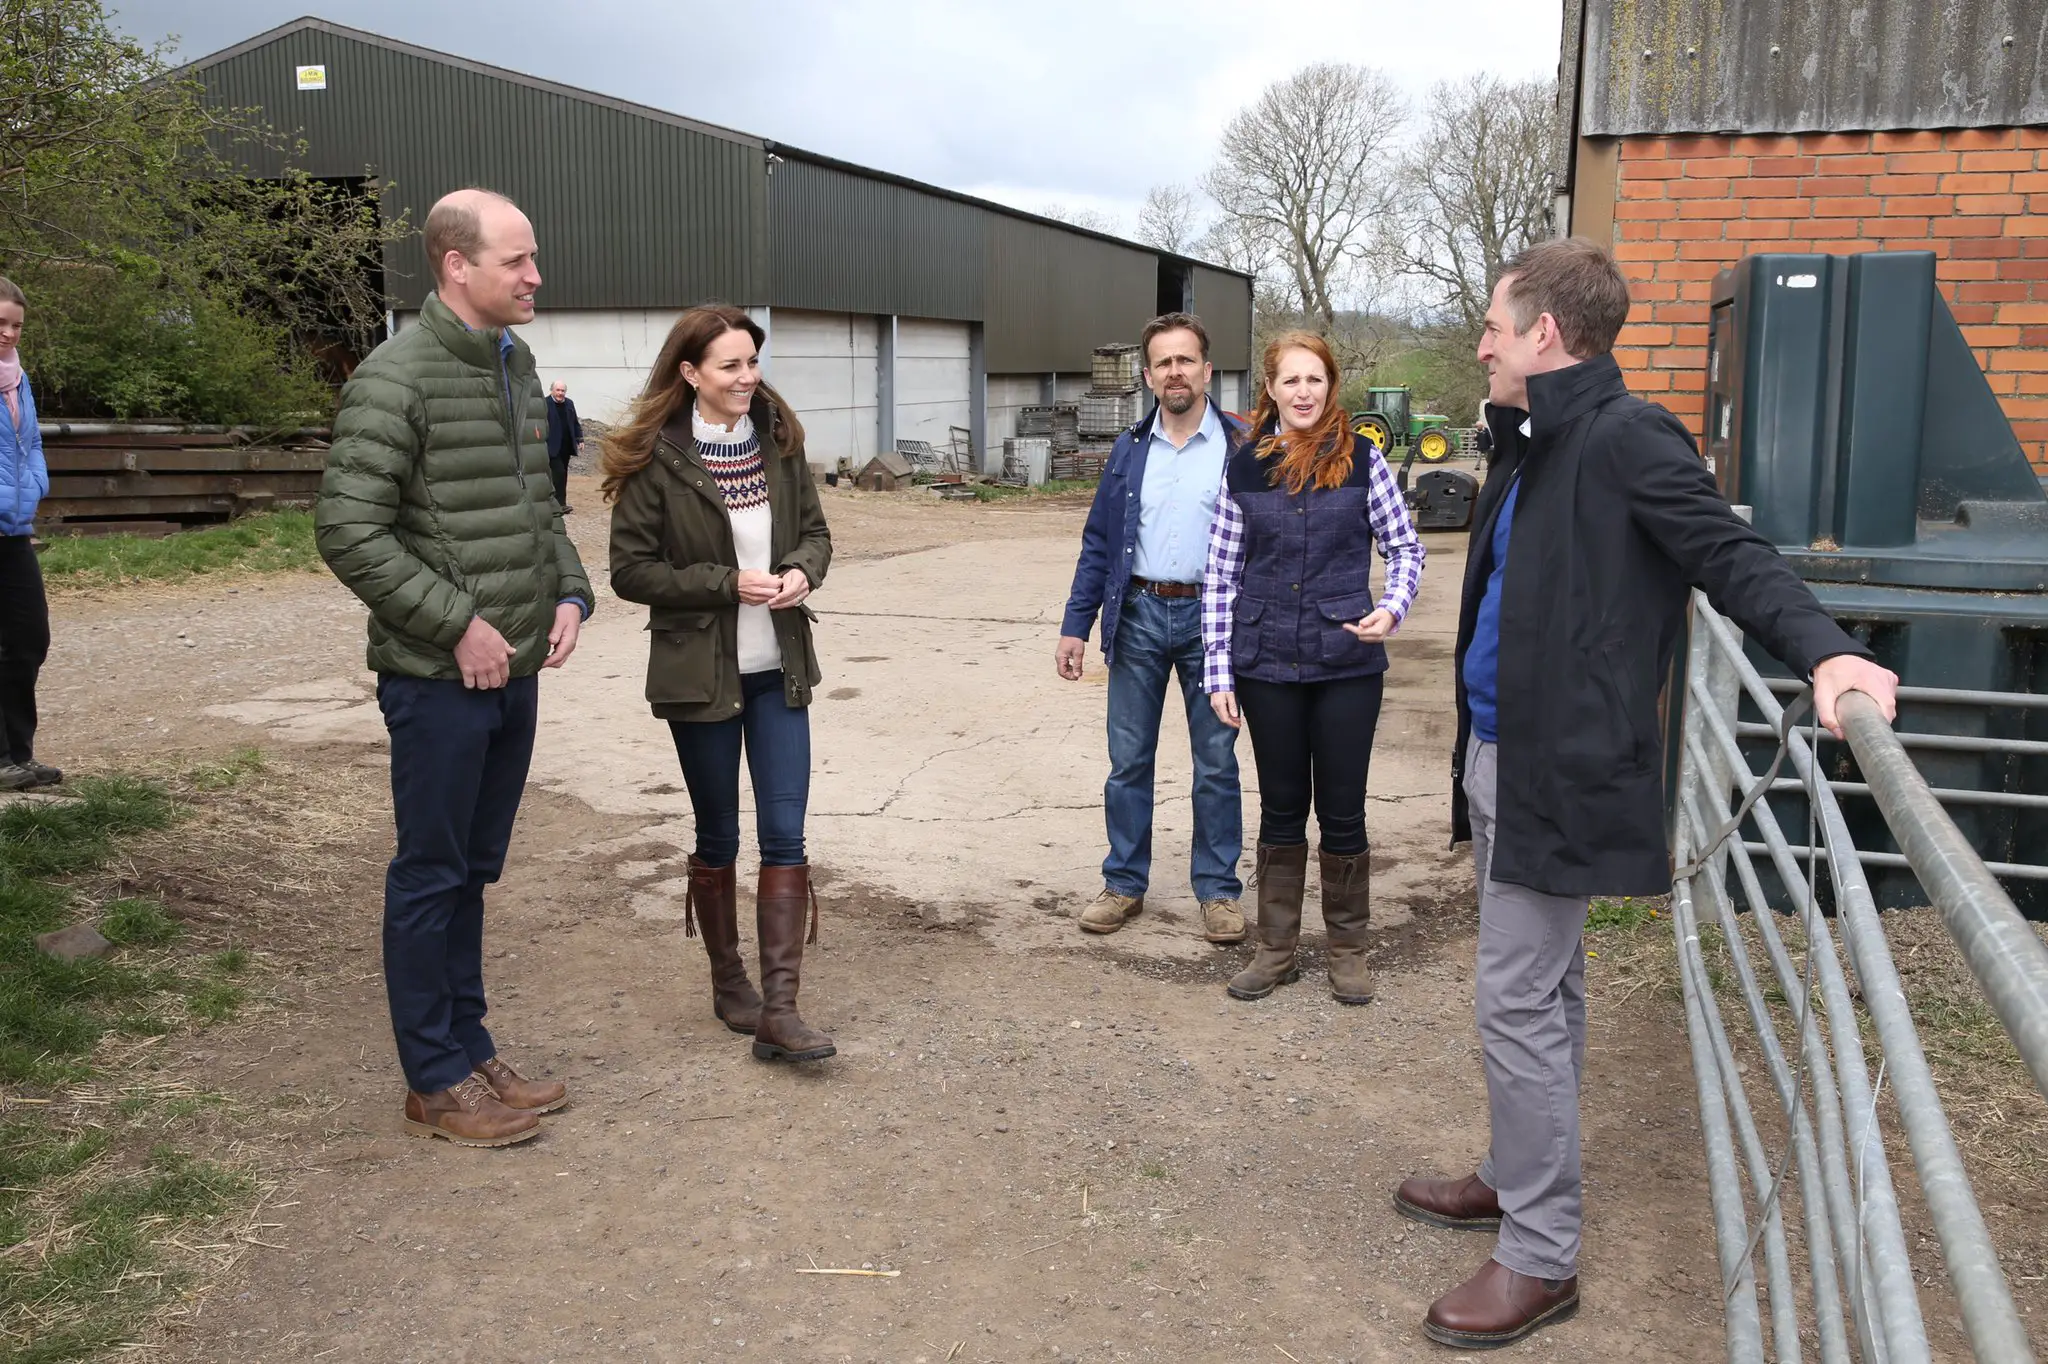 Prince William does some farming at the family’s country home Anmer Hall